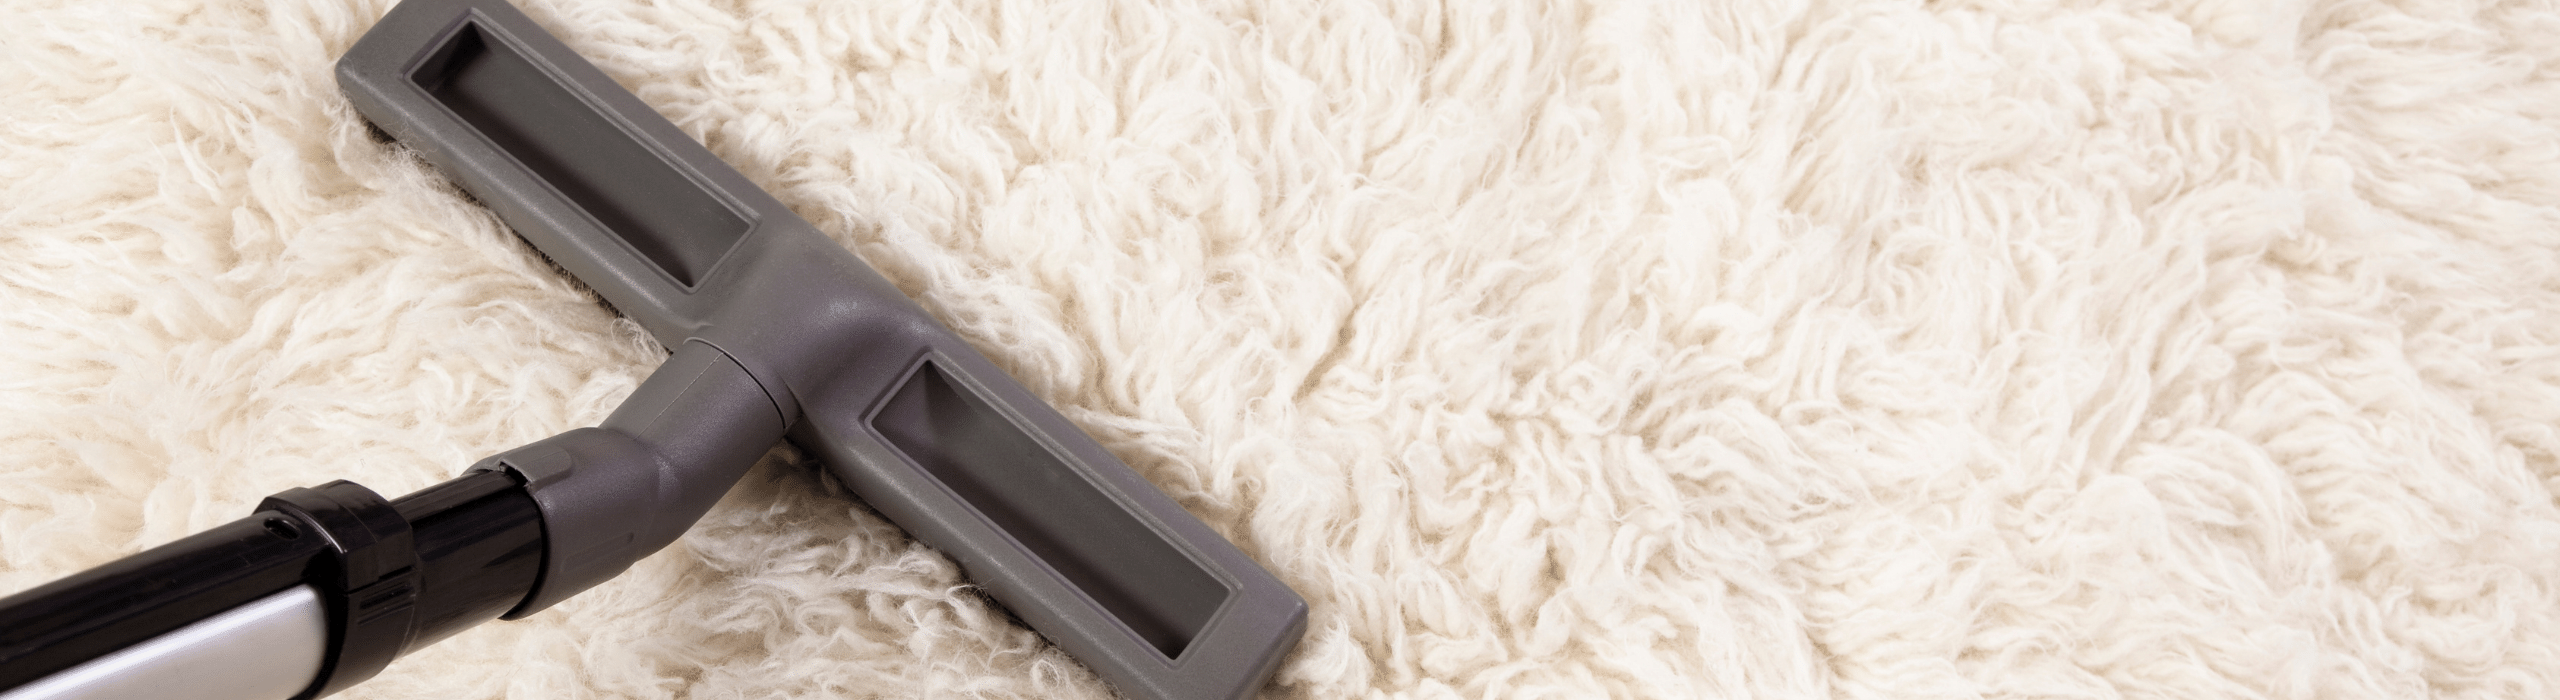 Vacuum attachment cleaning a white shag rug